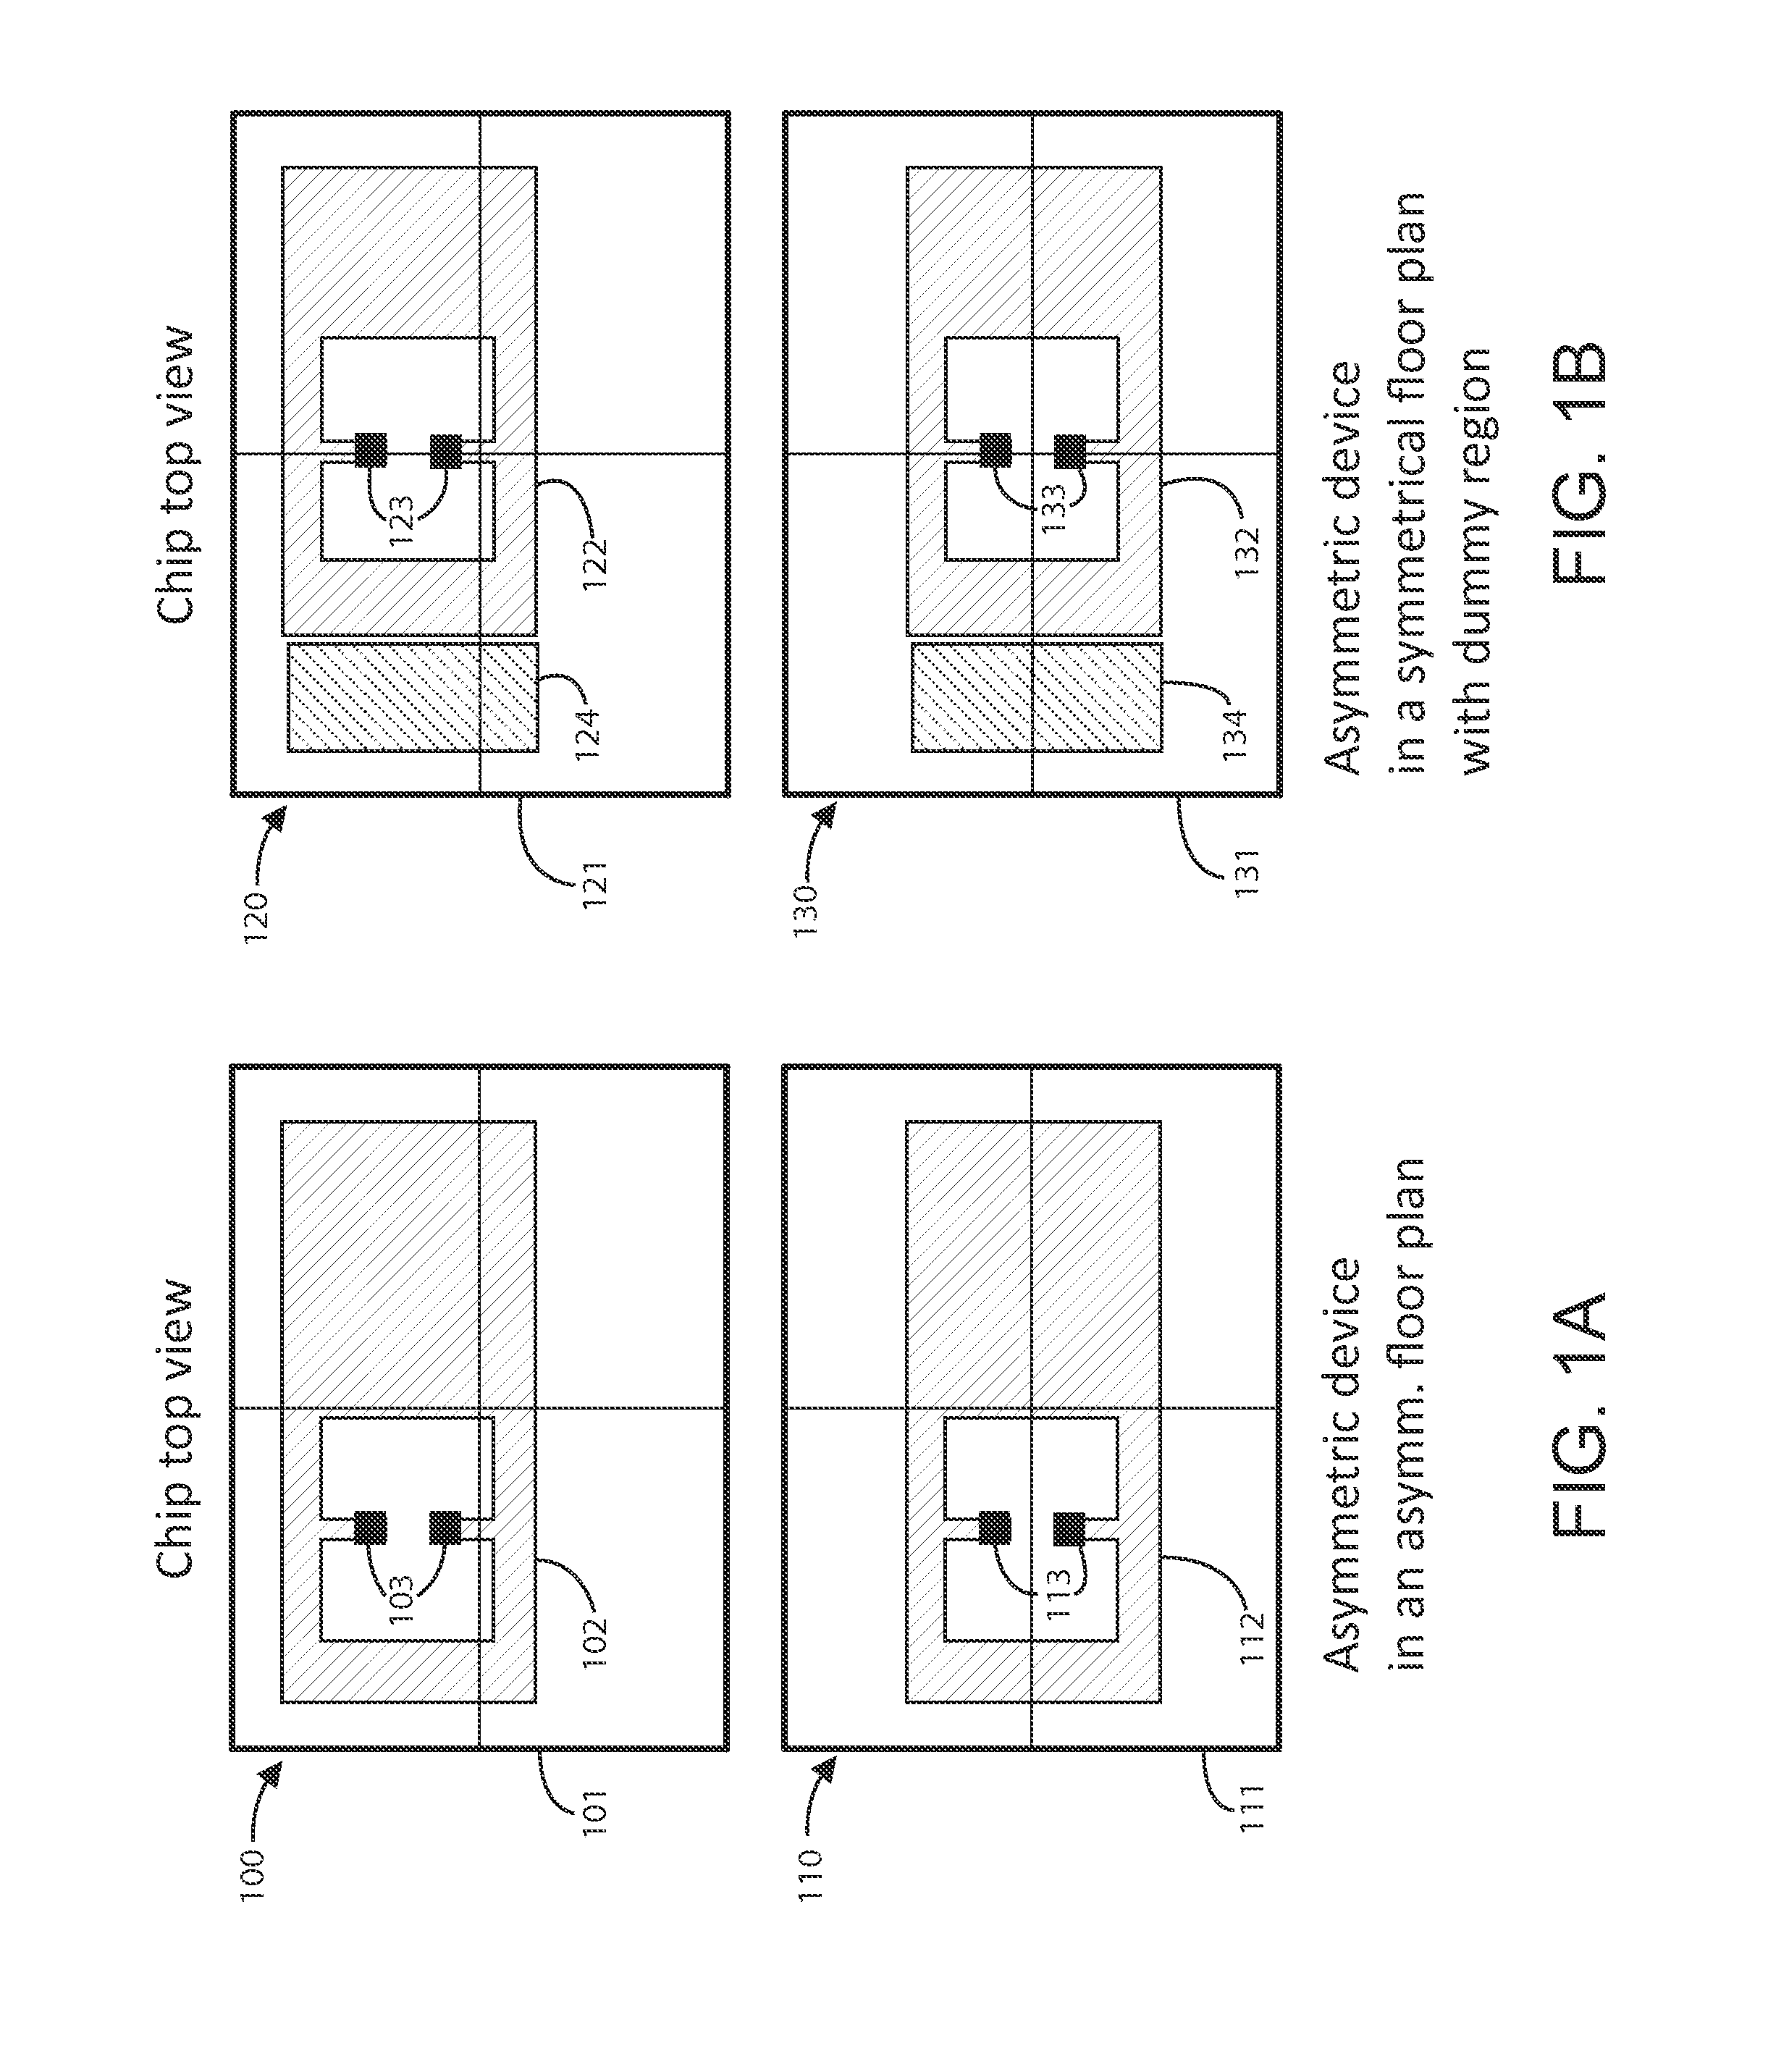 Methods and structures of integrated mems-cmos devices